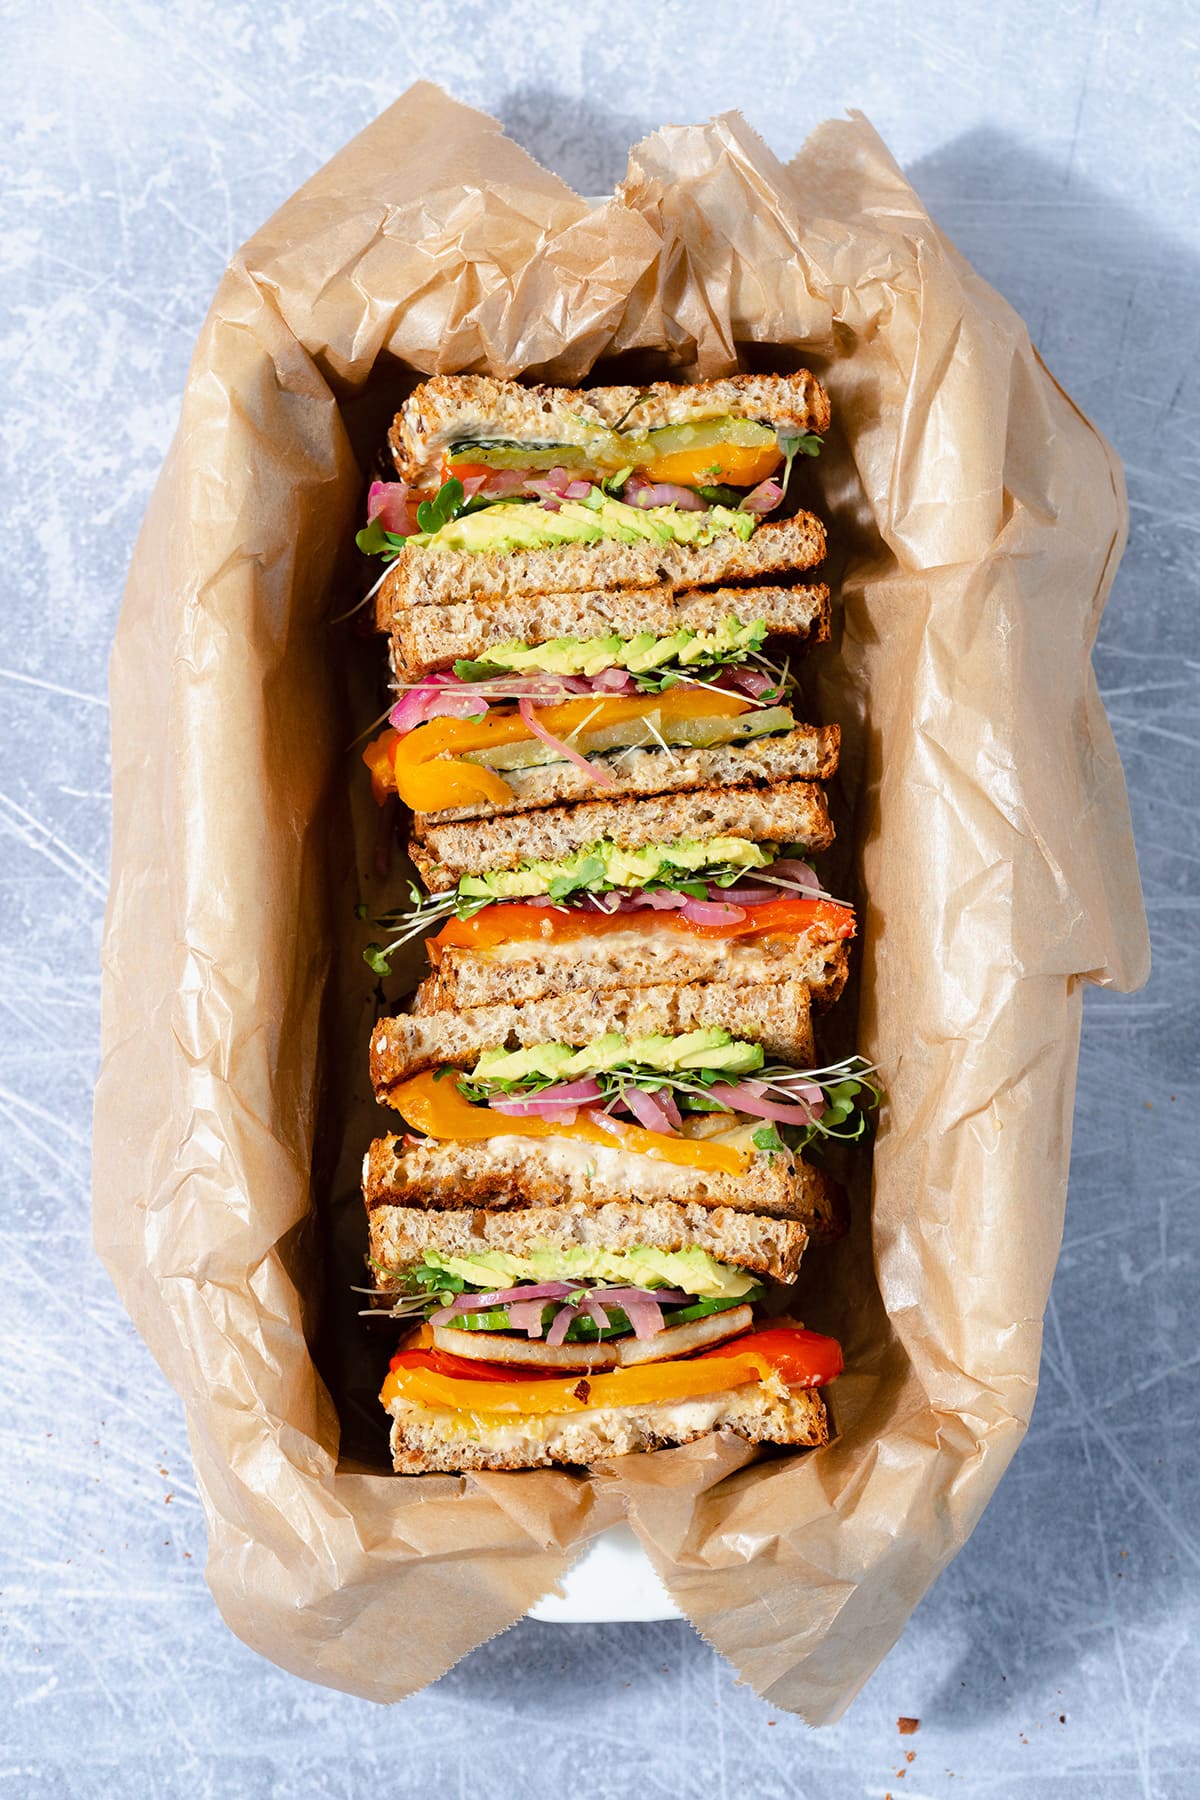 Halloumi sandwiches cut in half and arranged cut side up in a baking dish lined with parchment paper.